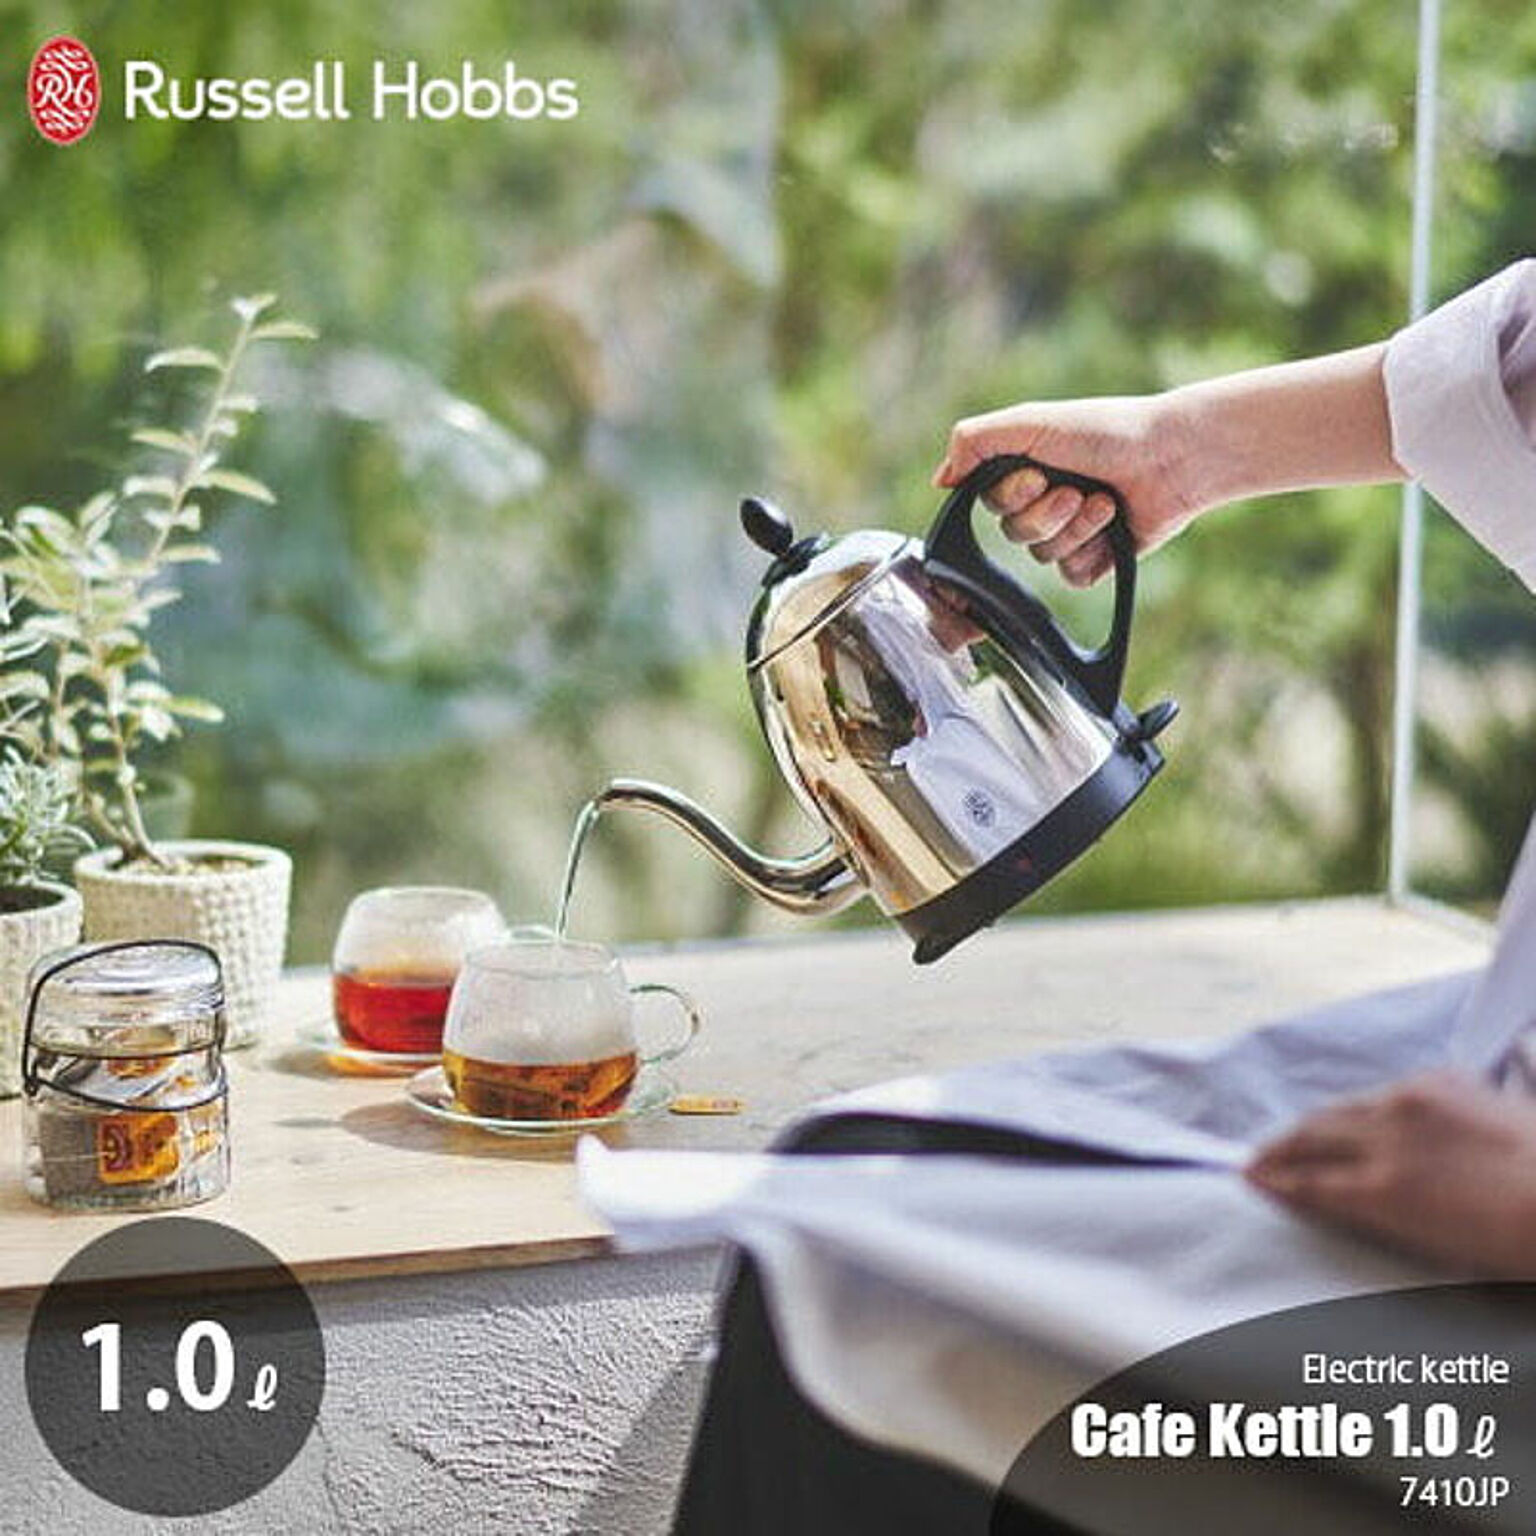  Russell Hobbs Electric Cafe Kettle 1.0L 7410JP: Home & Kitchen